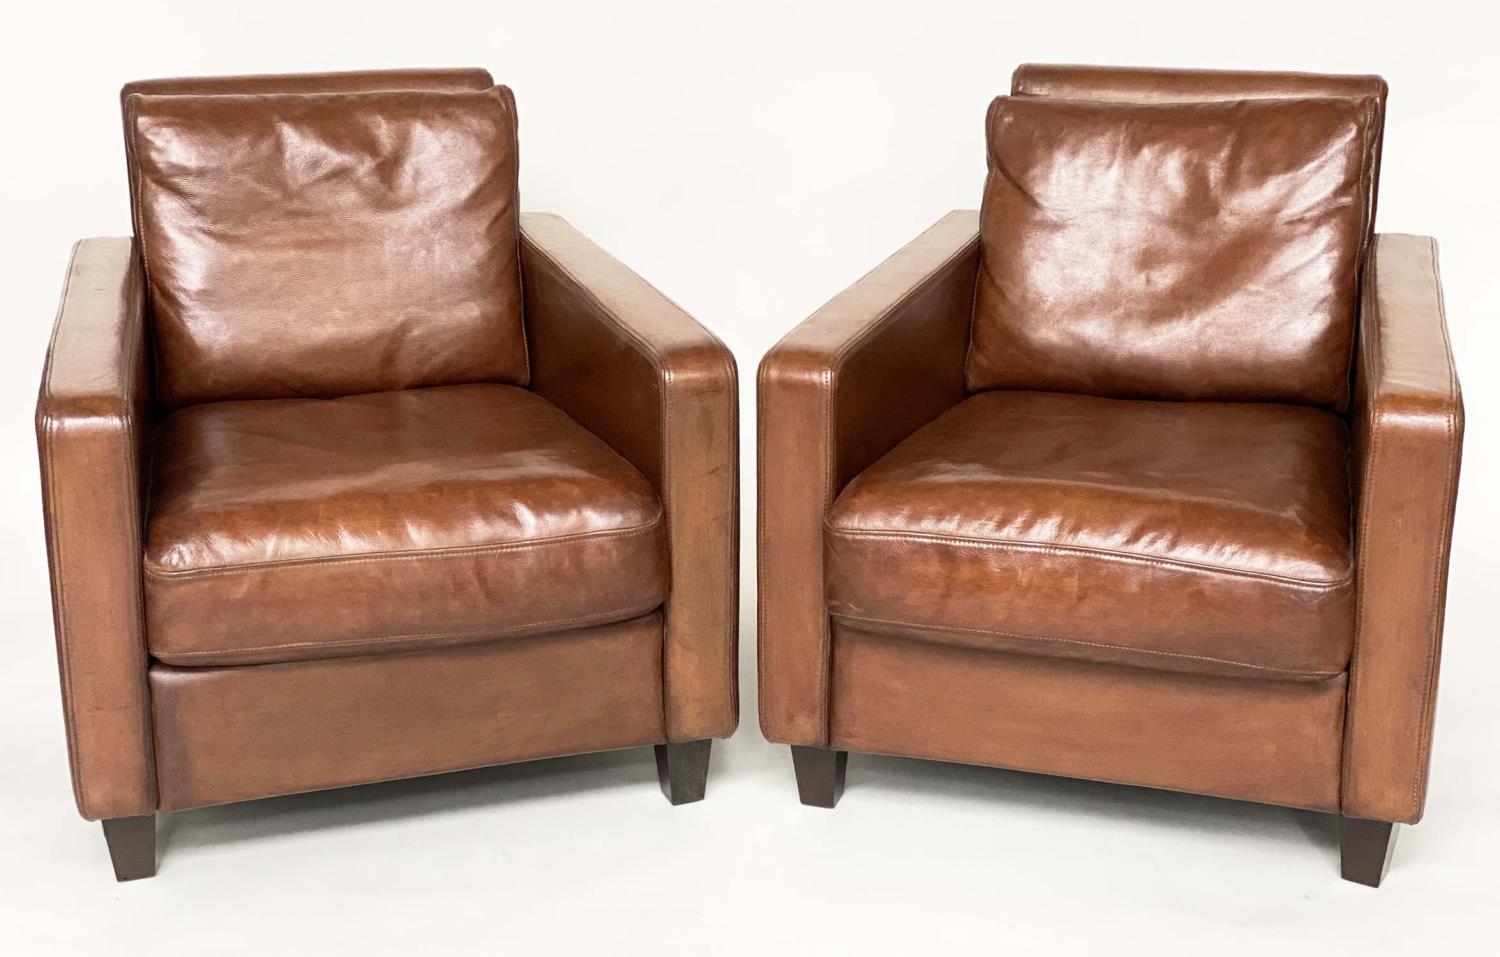 ARMCHAIRS, a pair, 1970s Conran design, mid brown leather upholstered with square back and arms